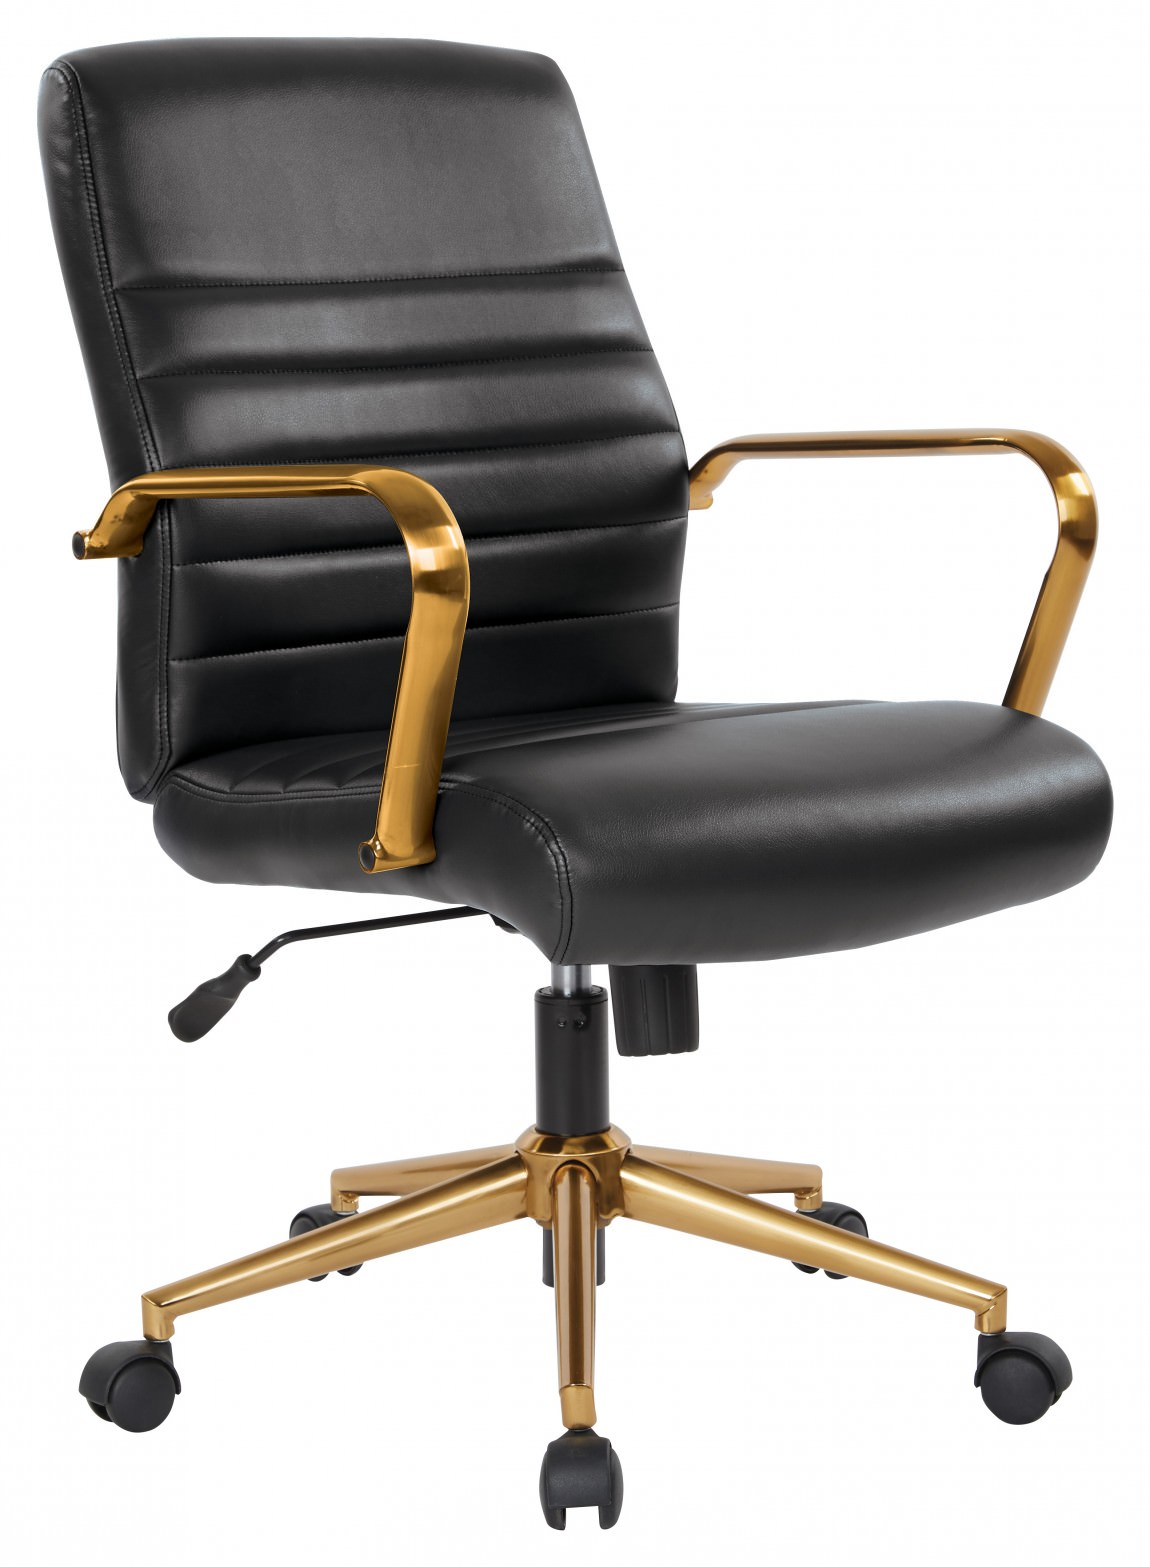 Executive Conference Room Chair